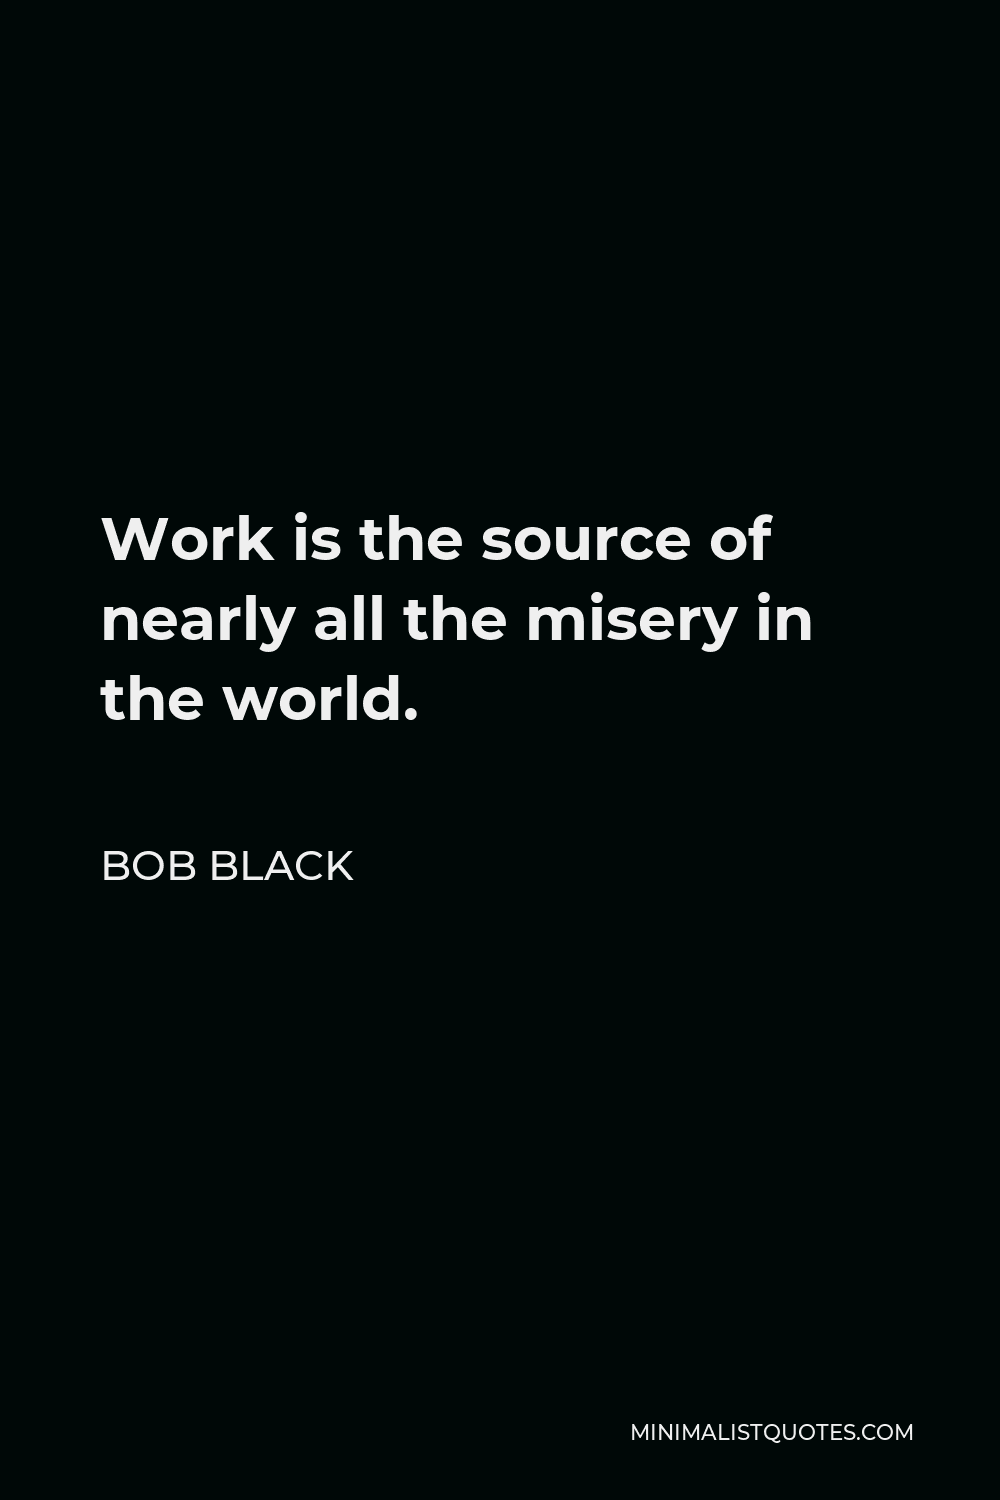 Bob Black Quote - Work is the source of nearly all the misery in the world.